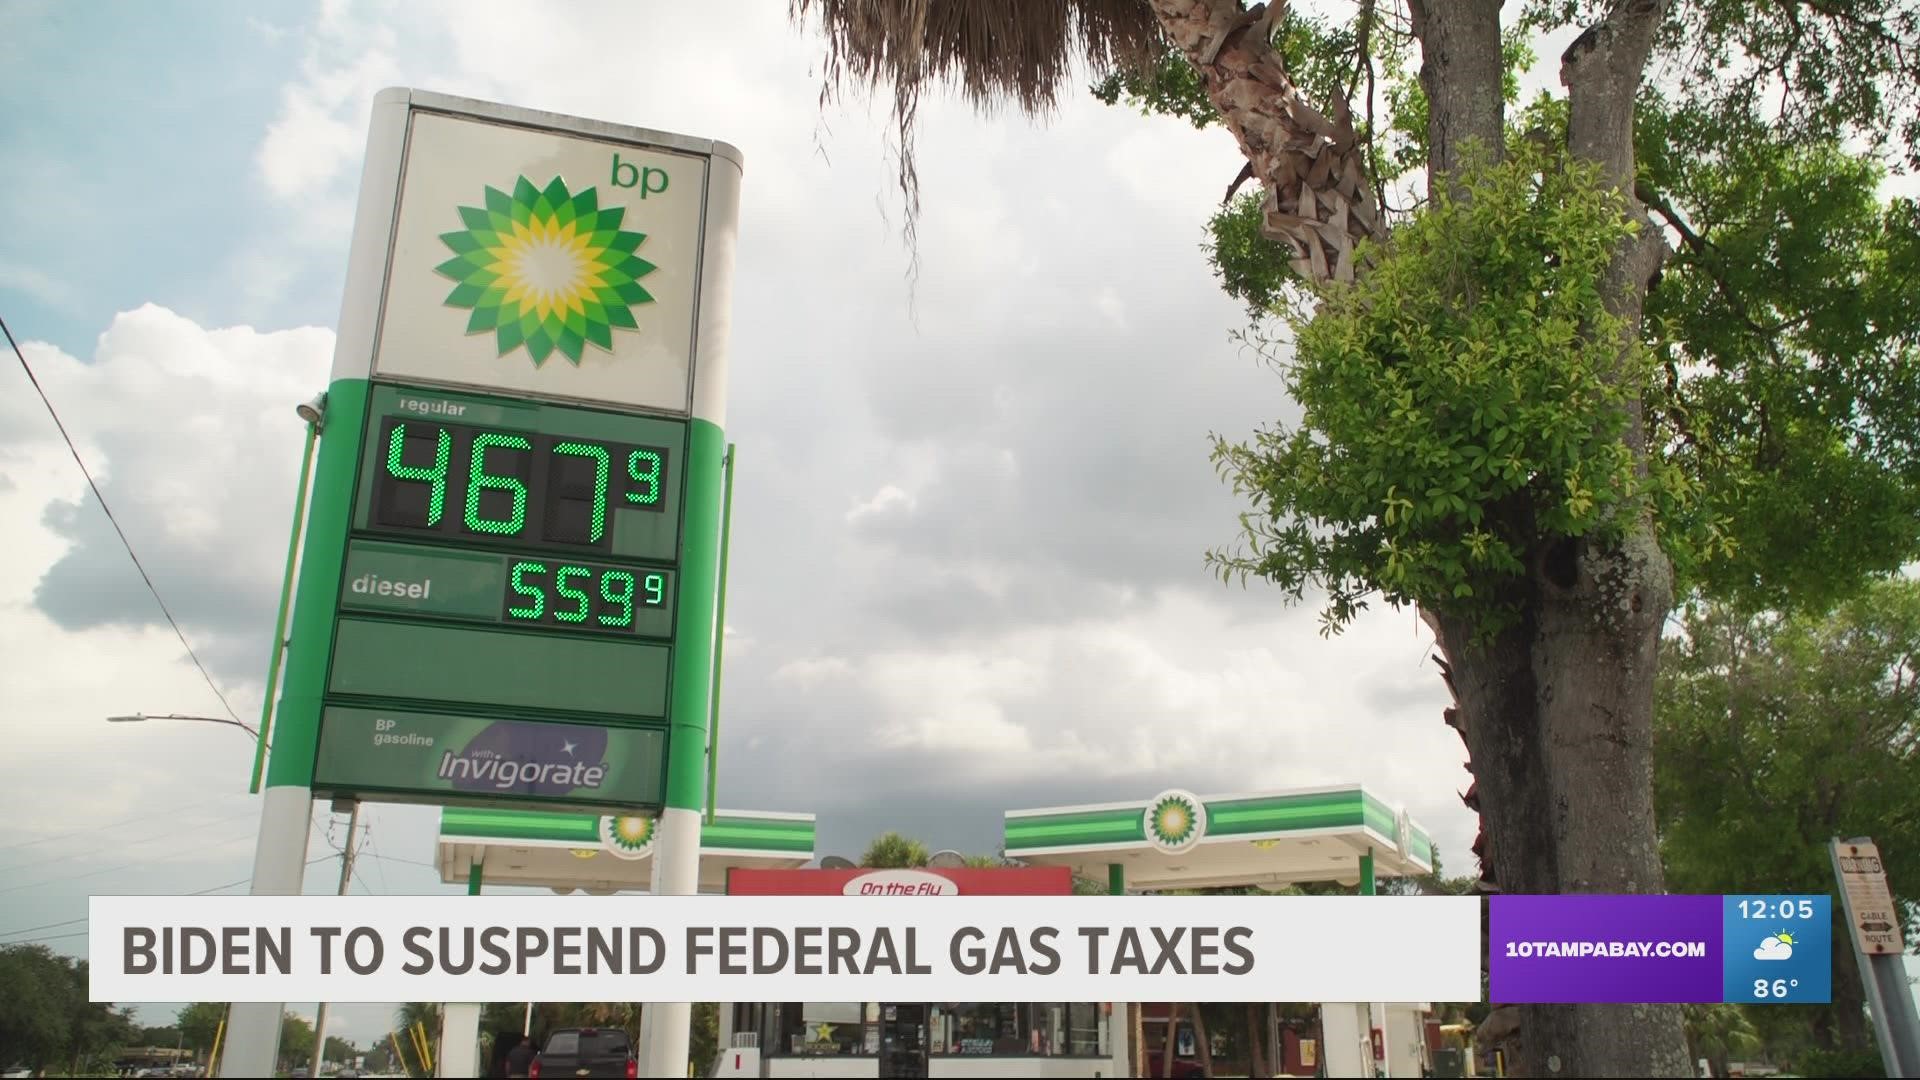 With high gas prices across the country, at issue is the 18.4 cents-a-gallon federal tax on gas and the 24.4 cents-a-gallon federal tax on diesel fuel.